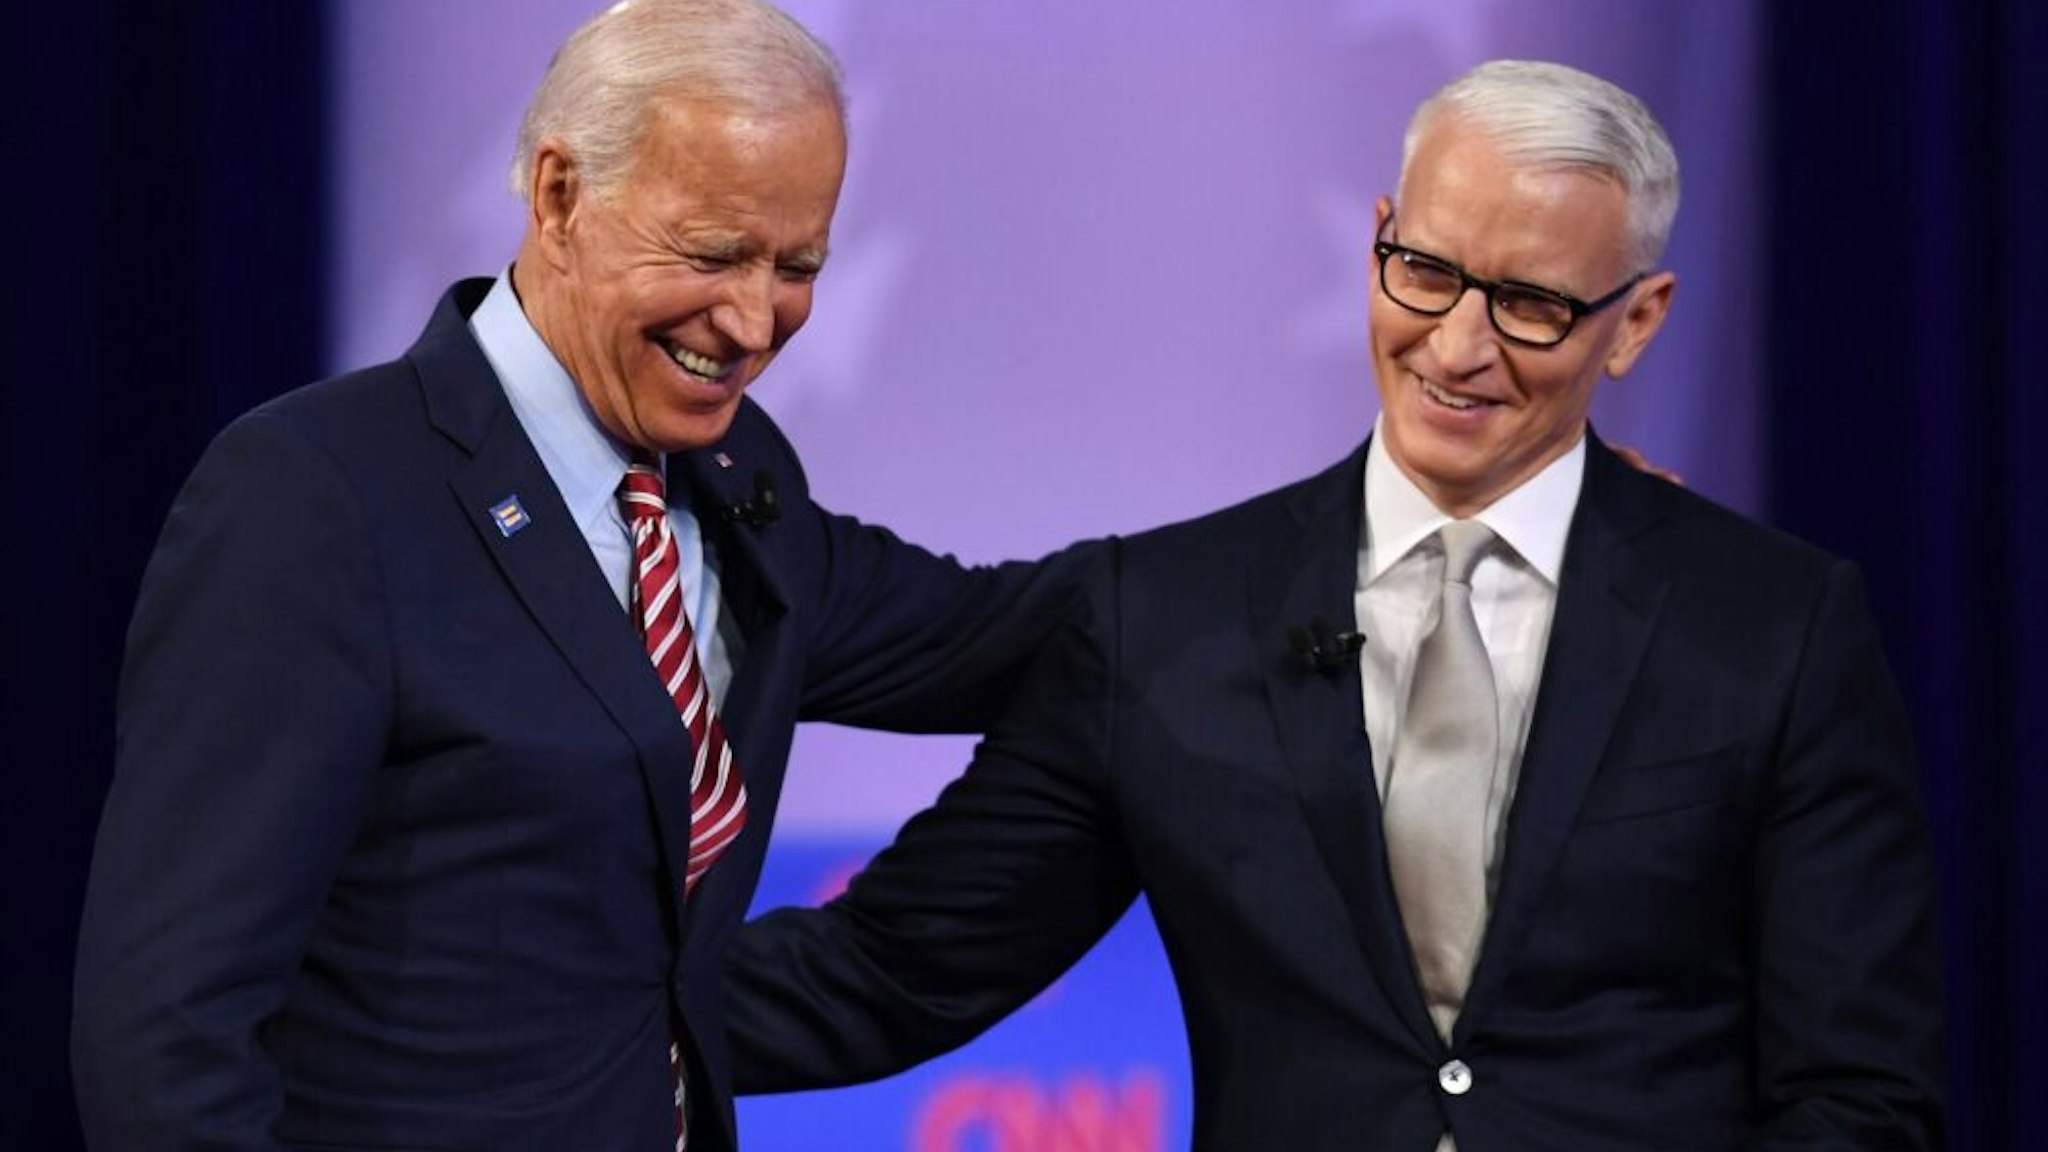 Democratic presidential hopeful former US Vice President Joe Biden (L) laughs with moderator CNN's Anderson Cooper during a town hall devoted to LGBTQ issues hosted by CNN and the Human rights Campaign Foundation at The Novo in Los Angeles on October 10, 2019.